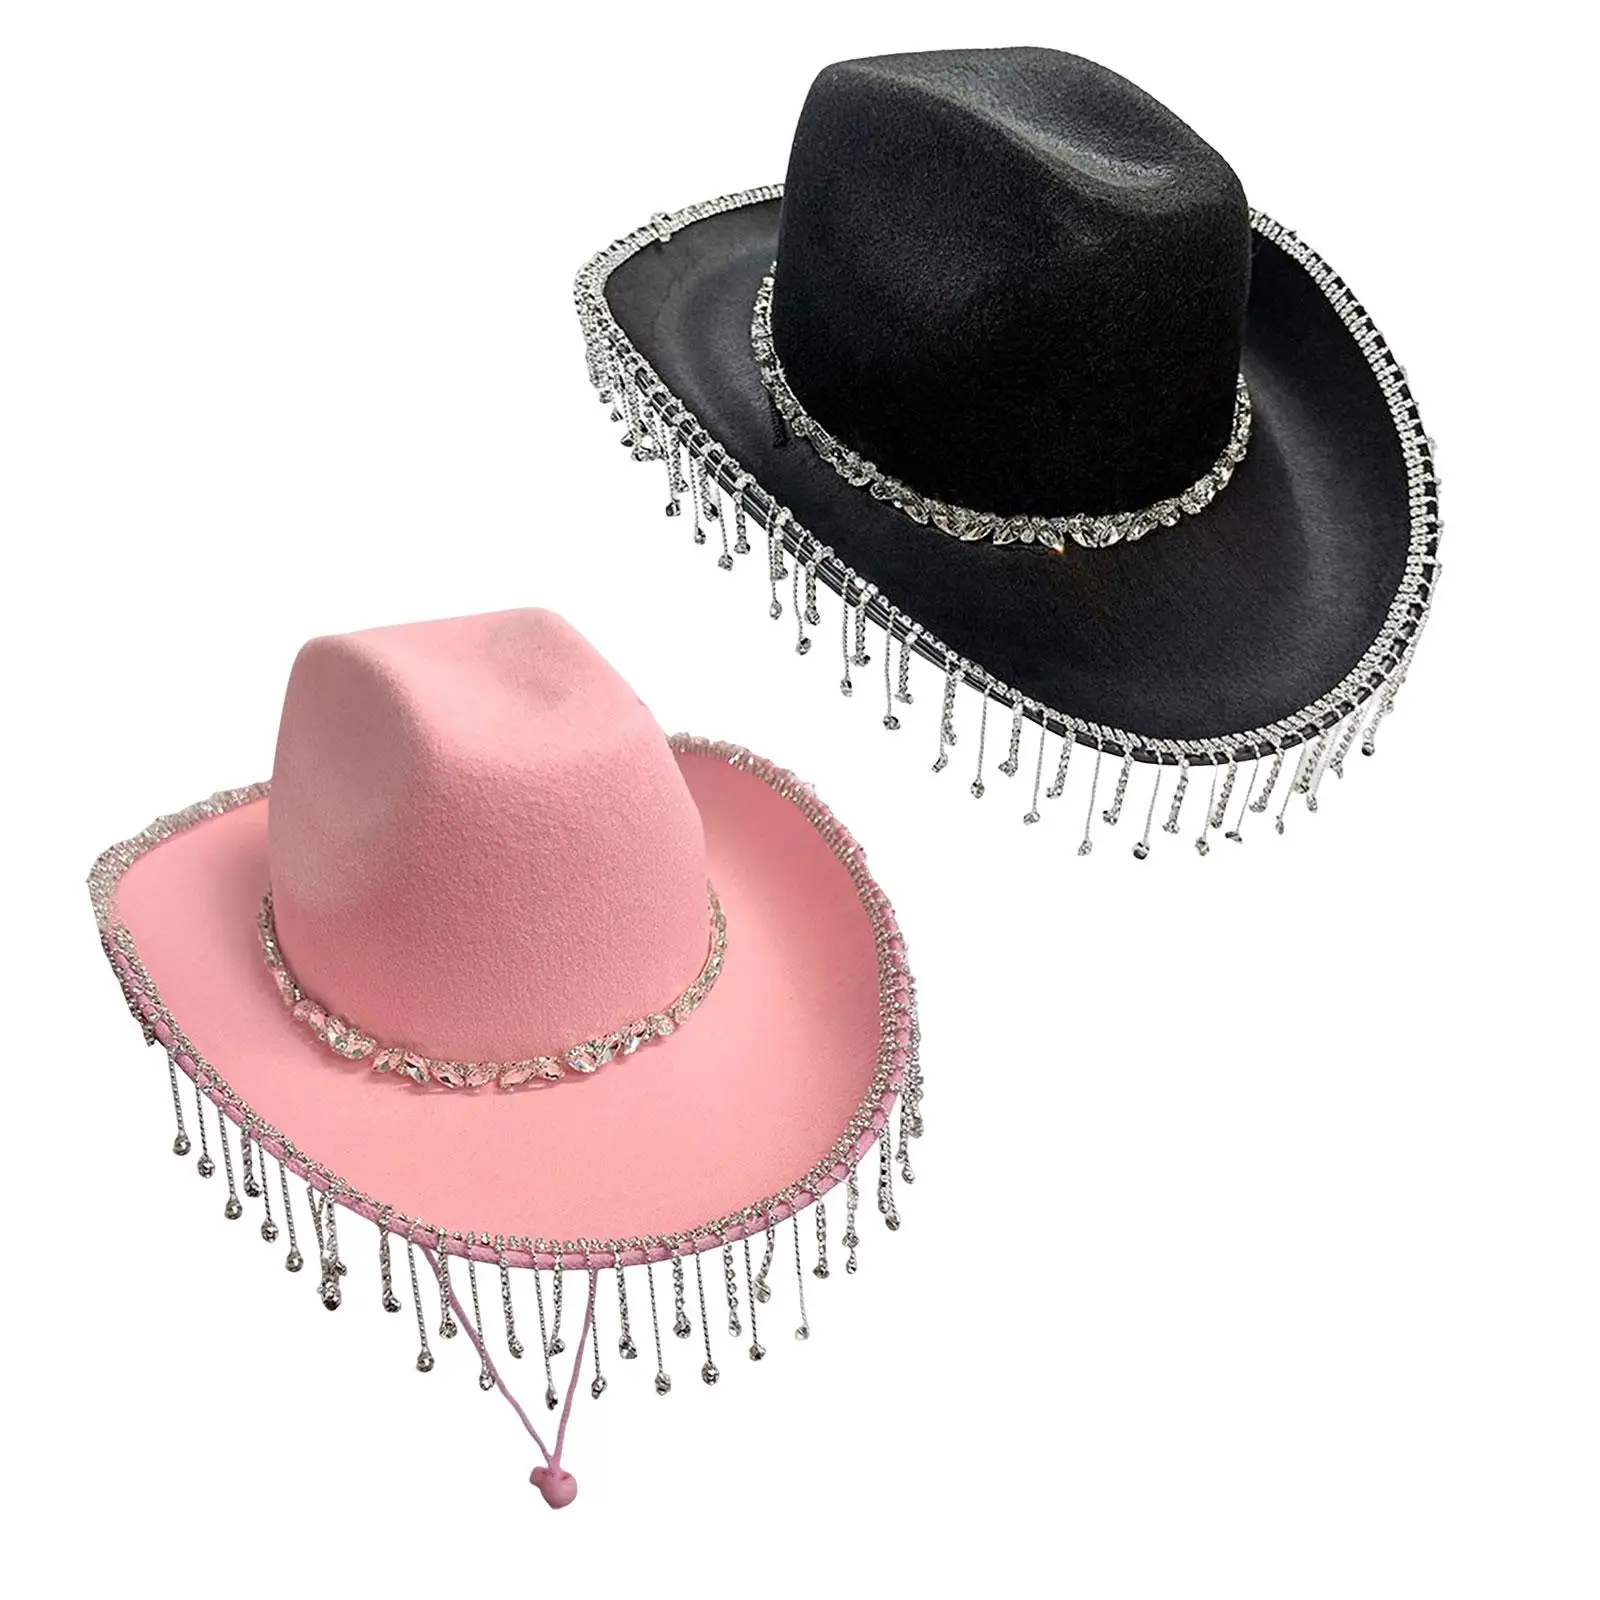 Western Cowboy Hat Photo Props Beach Sunshade Events Summer Travel Bridal Engagement Party Teens Outdoor Wide Brim Hat Disco Hat